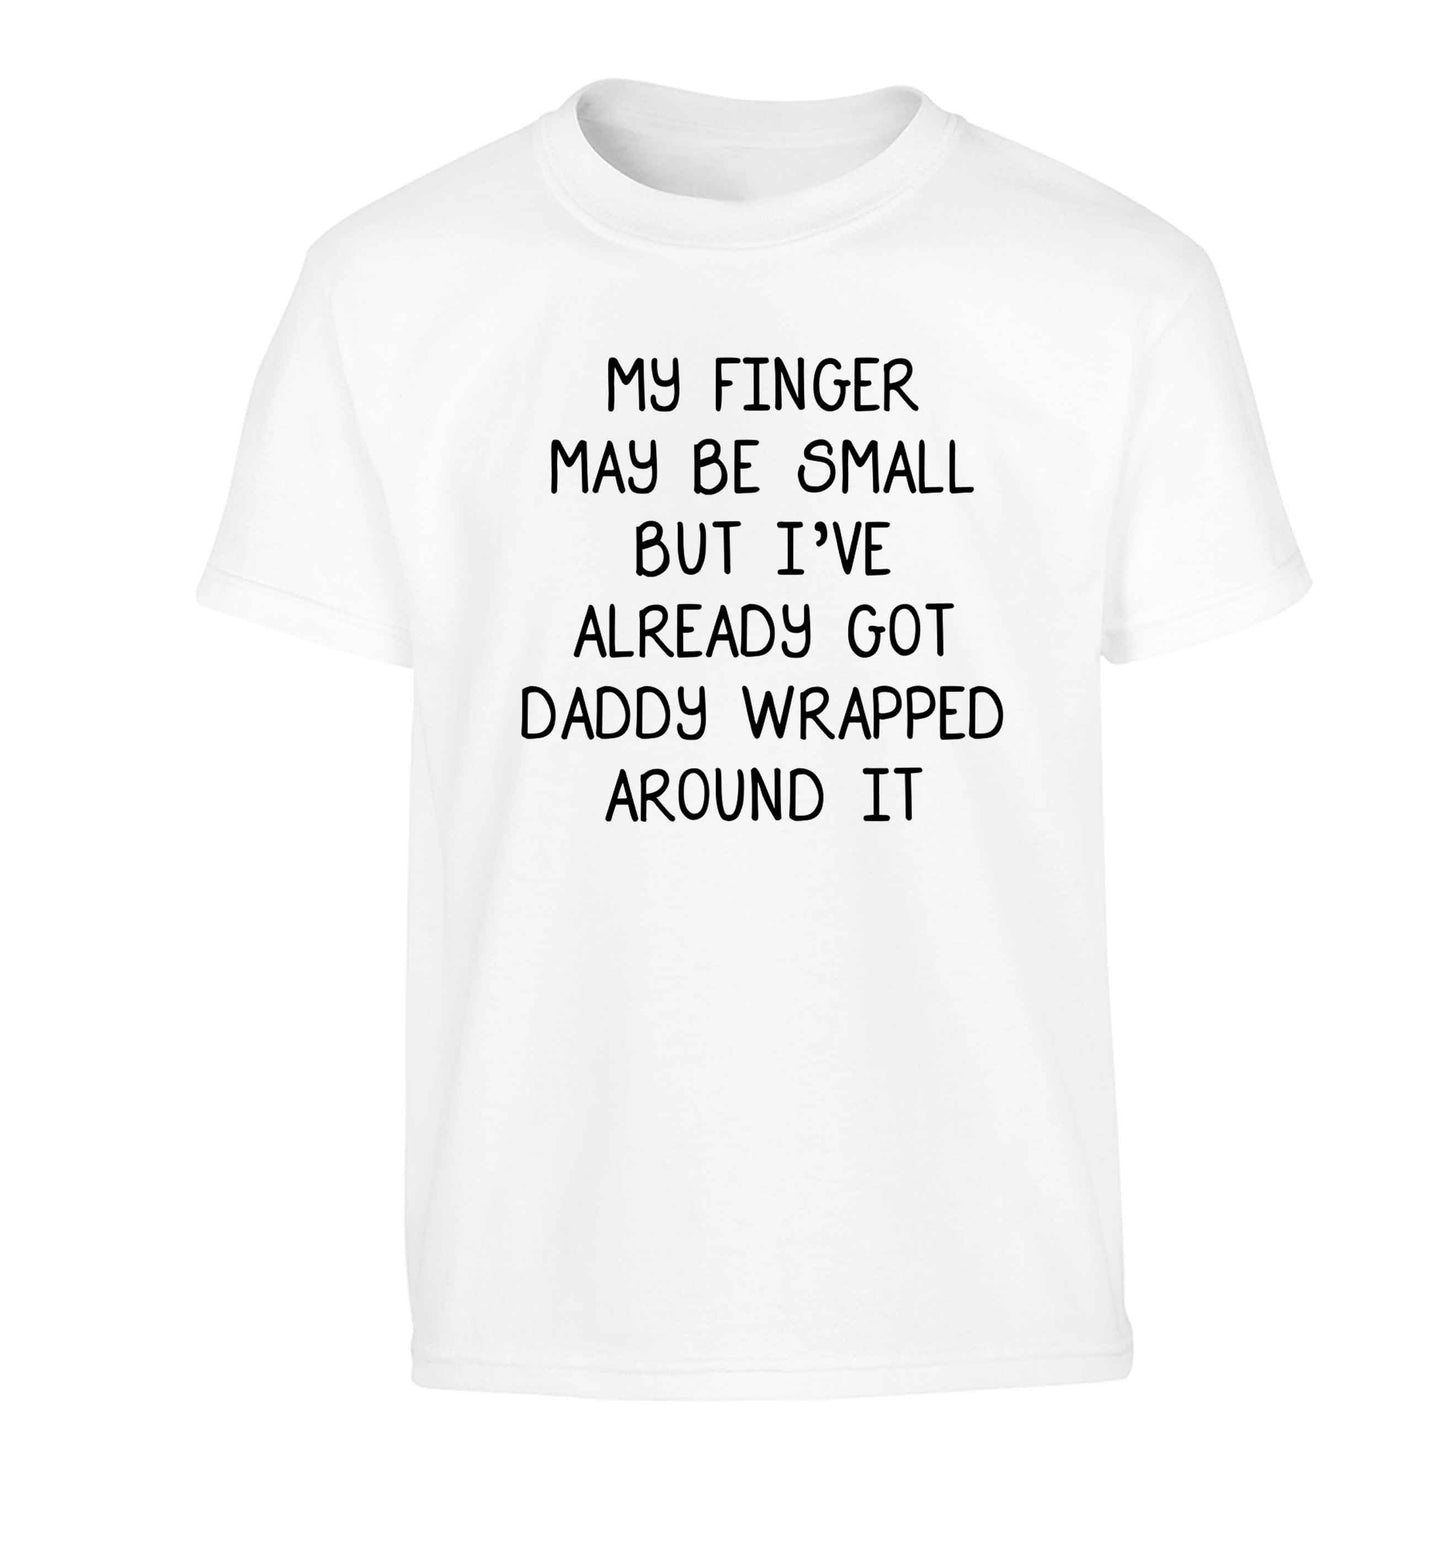 My finger may be small but I've already got daddy wrapped around it Children's white Tshirt 12-13 Years